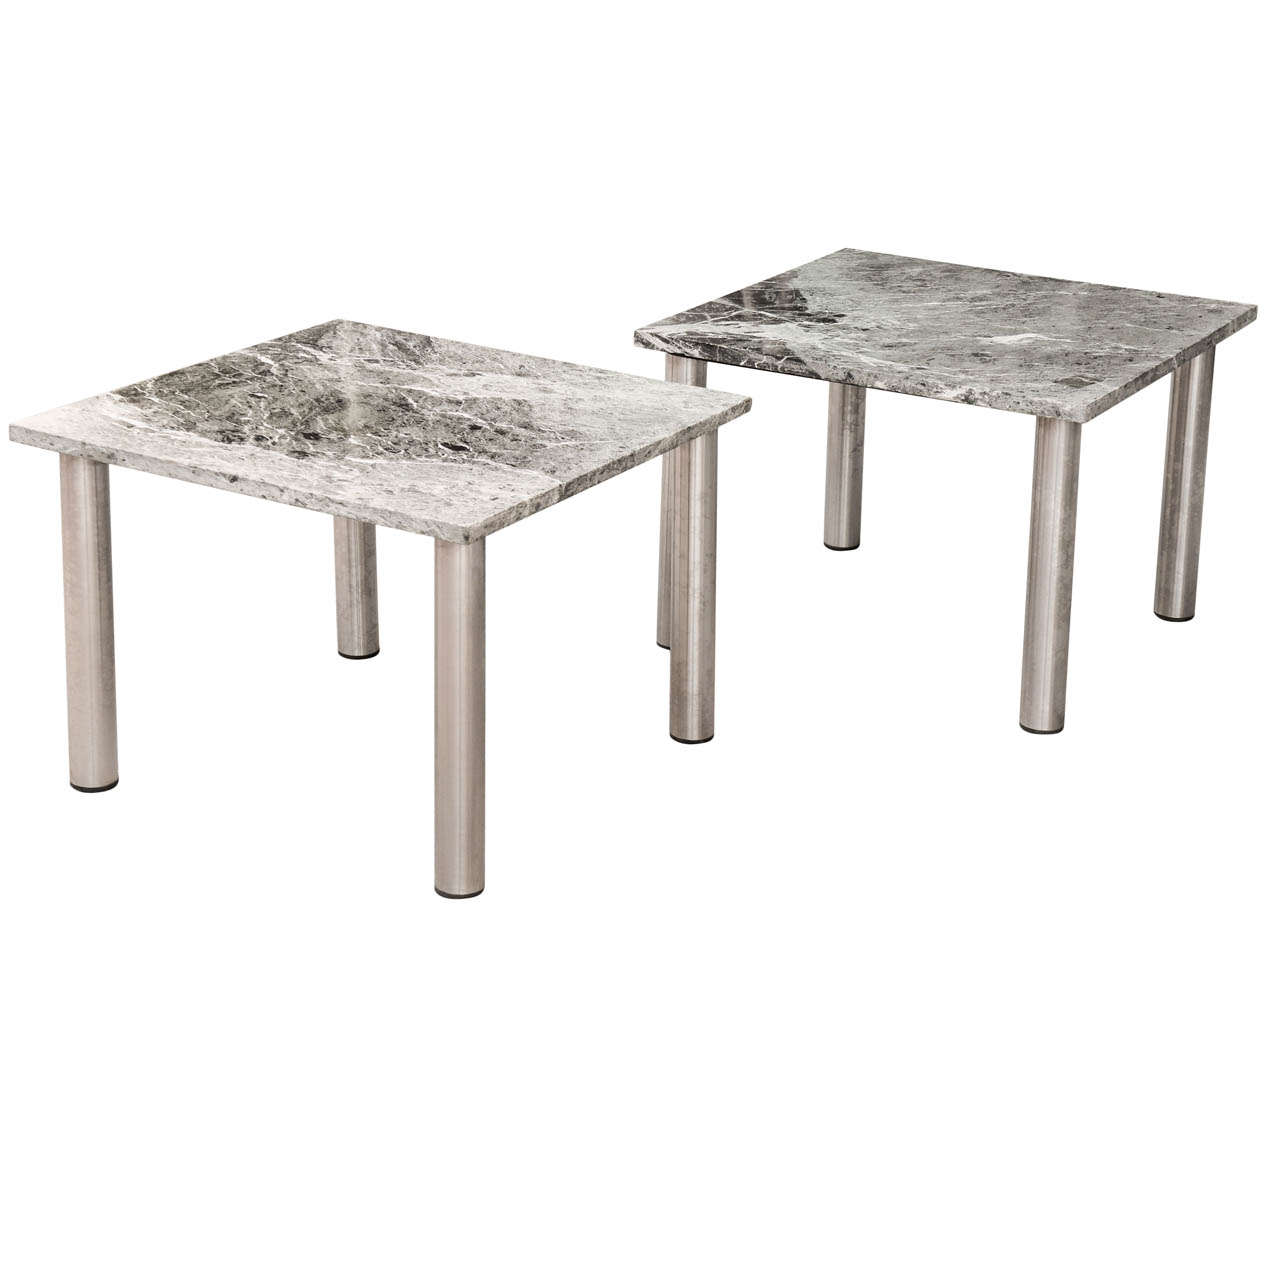 Pair of Vintage 1970s Stainless Steel and Marble Topped Coffee Tables For Sale